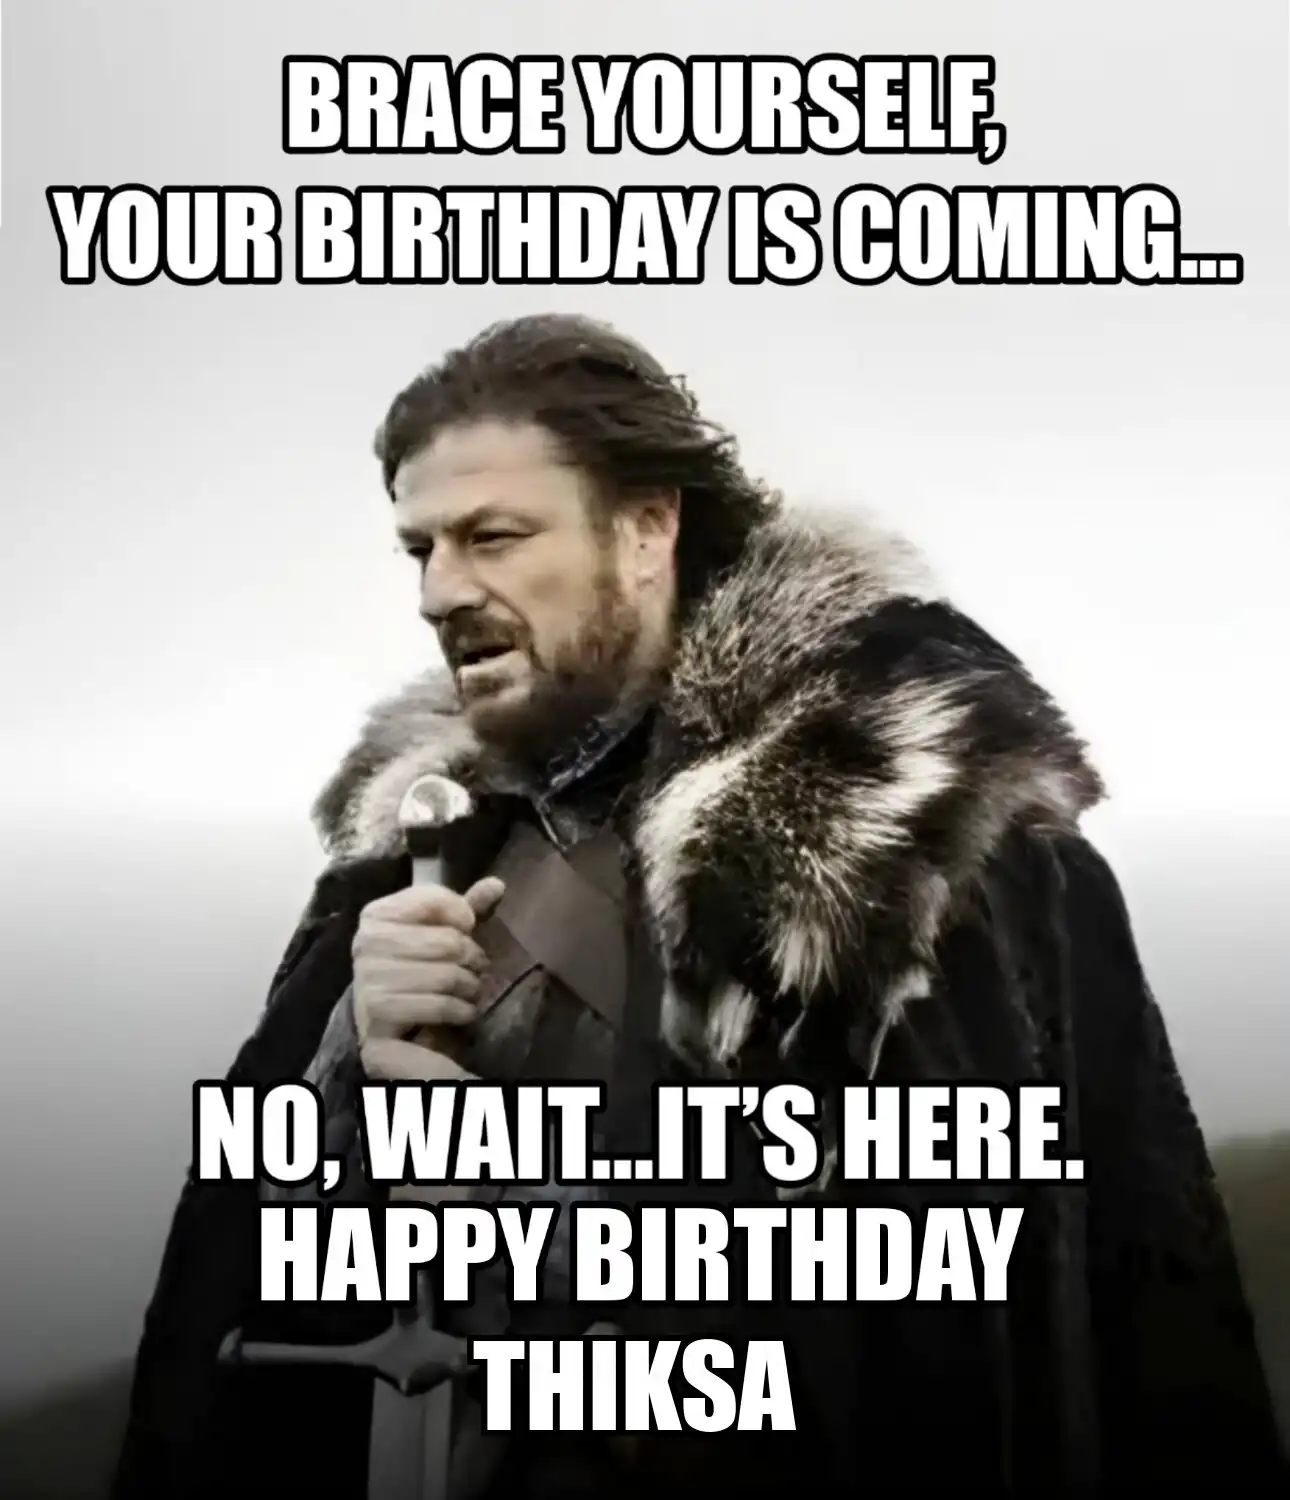 Happy Birthday Thiksa Brace Yourself Your Birthday Is Coming Meme